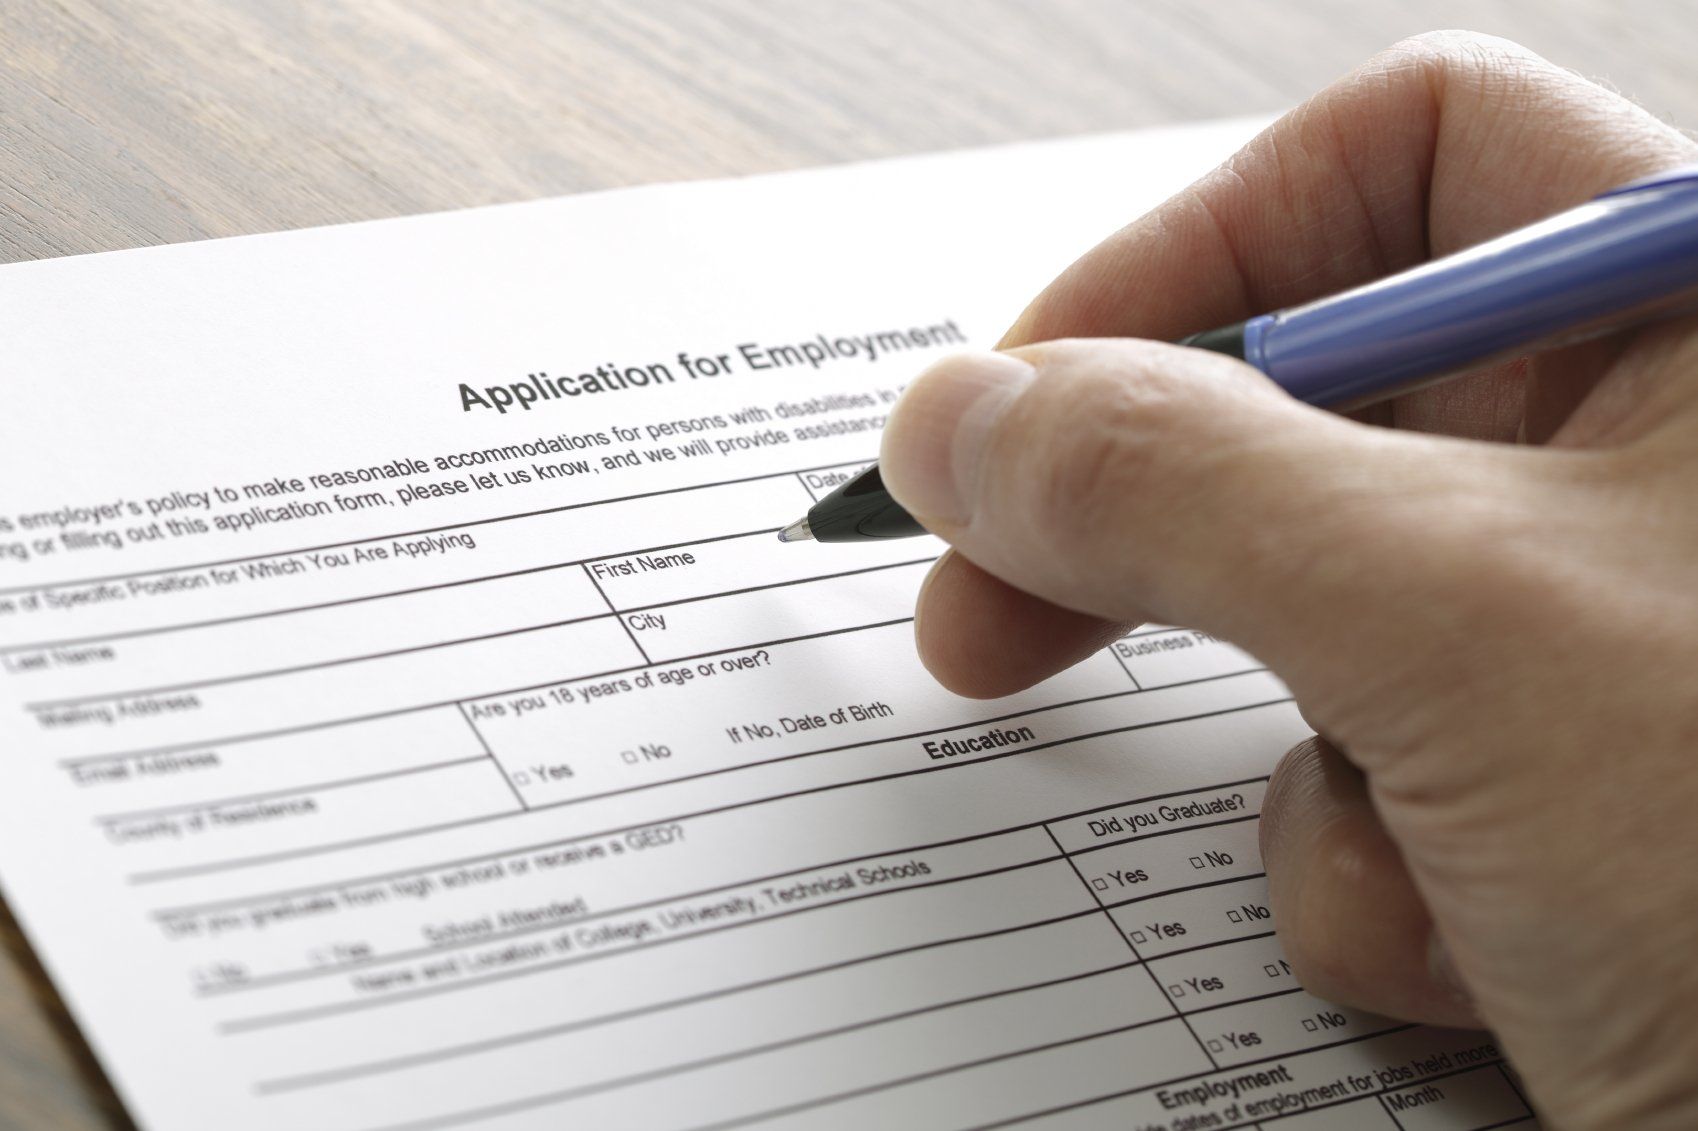 Graphic of someone holding a pen filling out a form